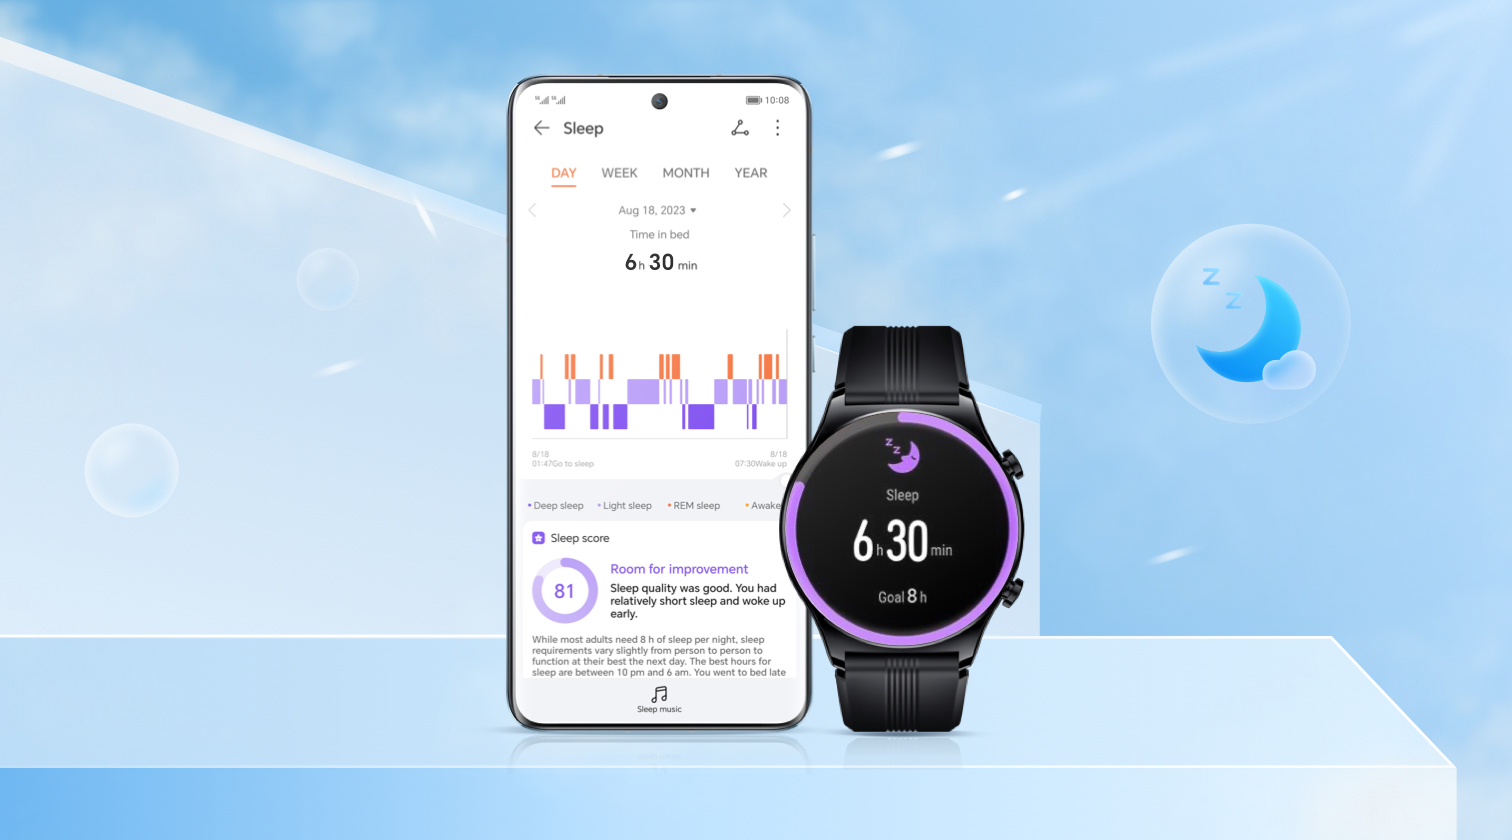 How to Use HONOR Wearables to Monitor Sleep？